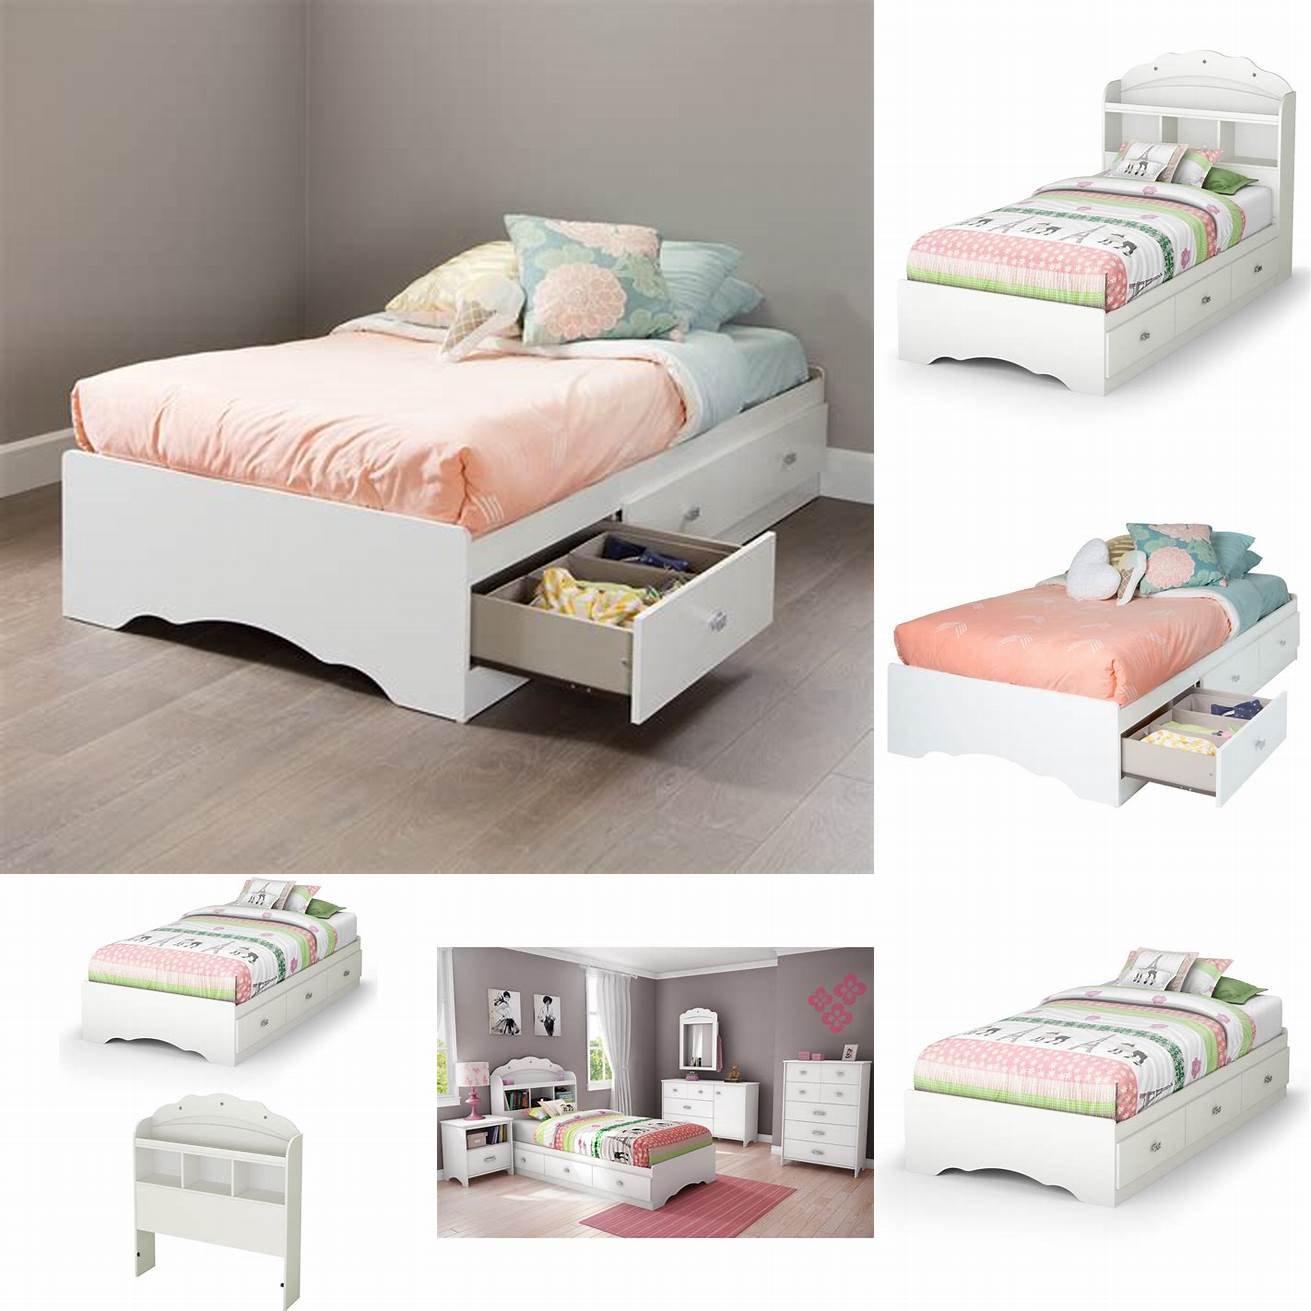 The South Shore Tiara Mates Bed with Drawers is perfect for the little princess in your life who needs extra storage space